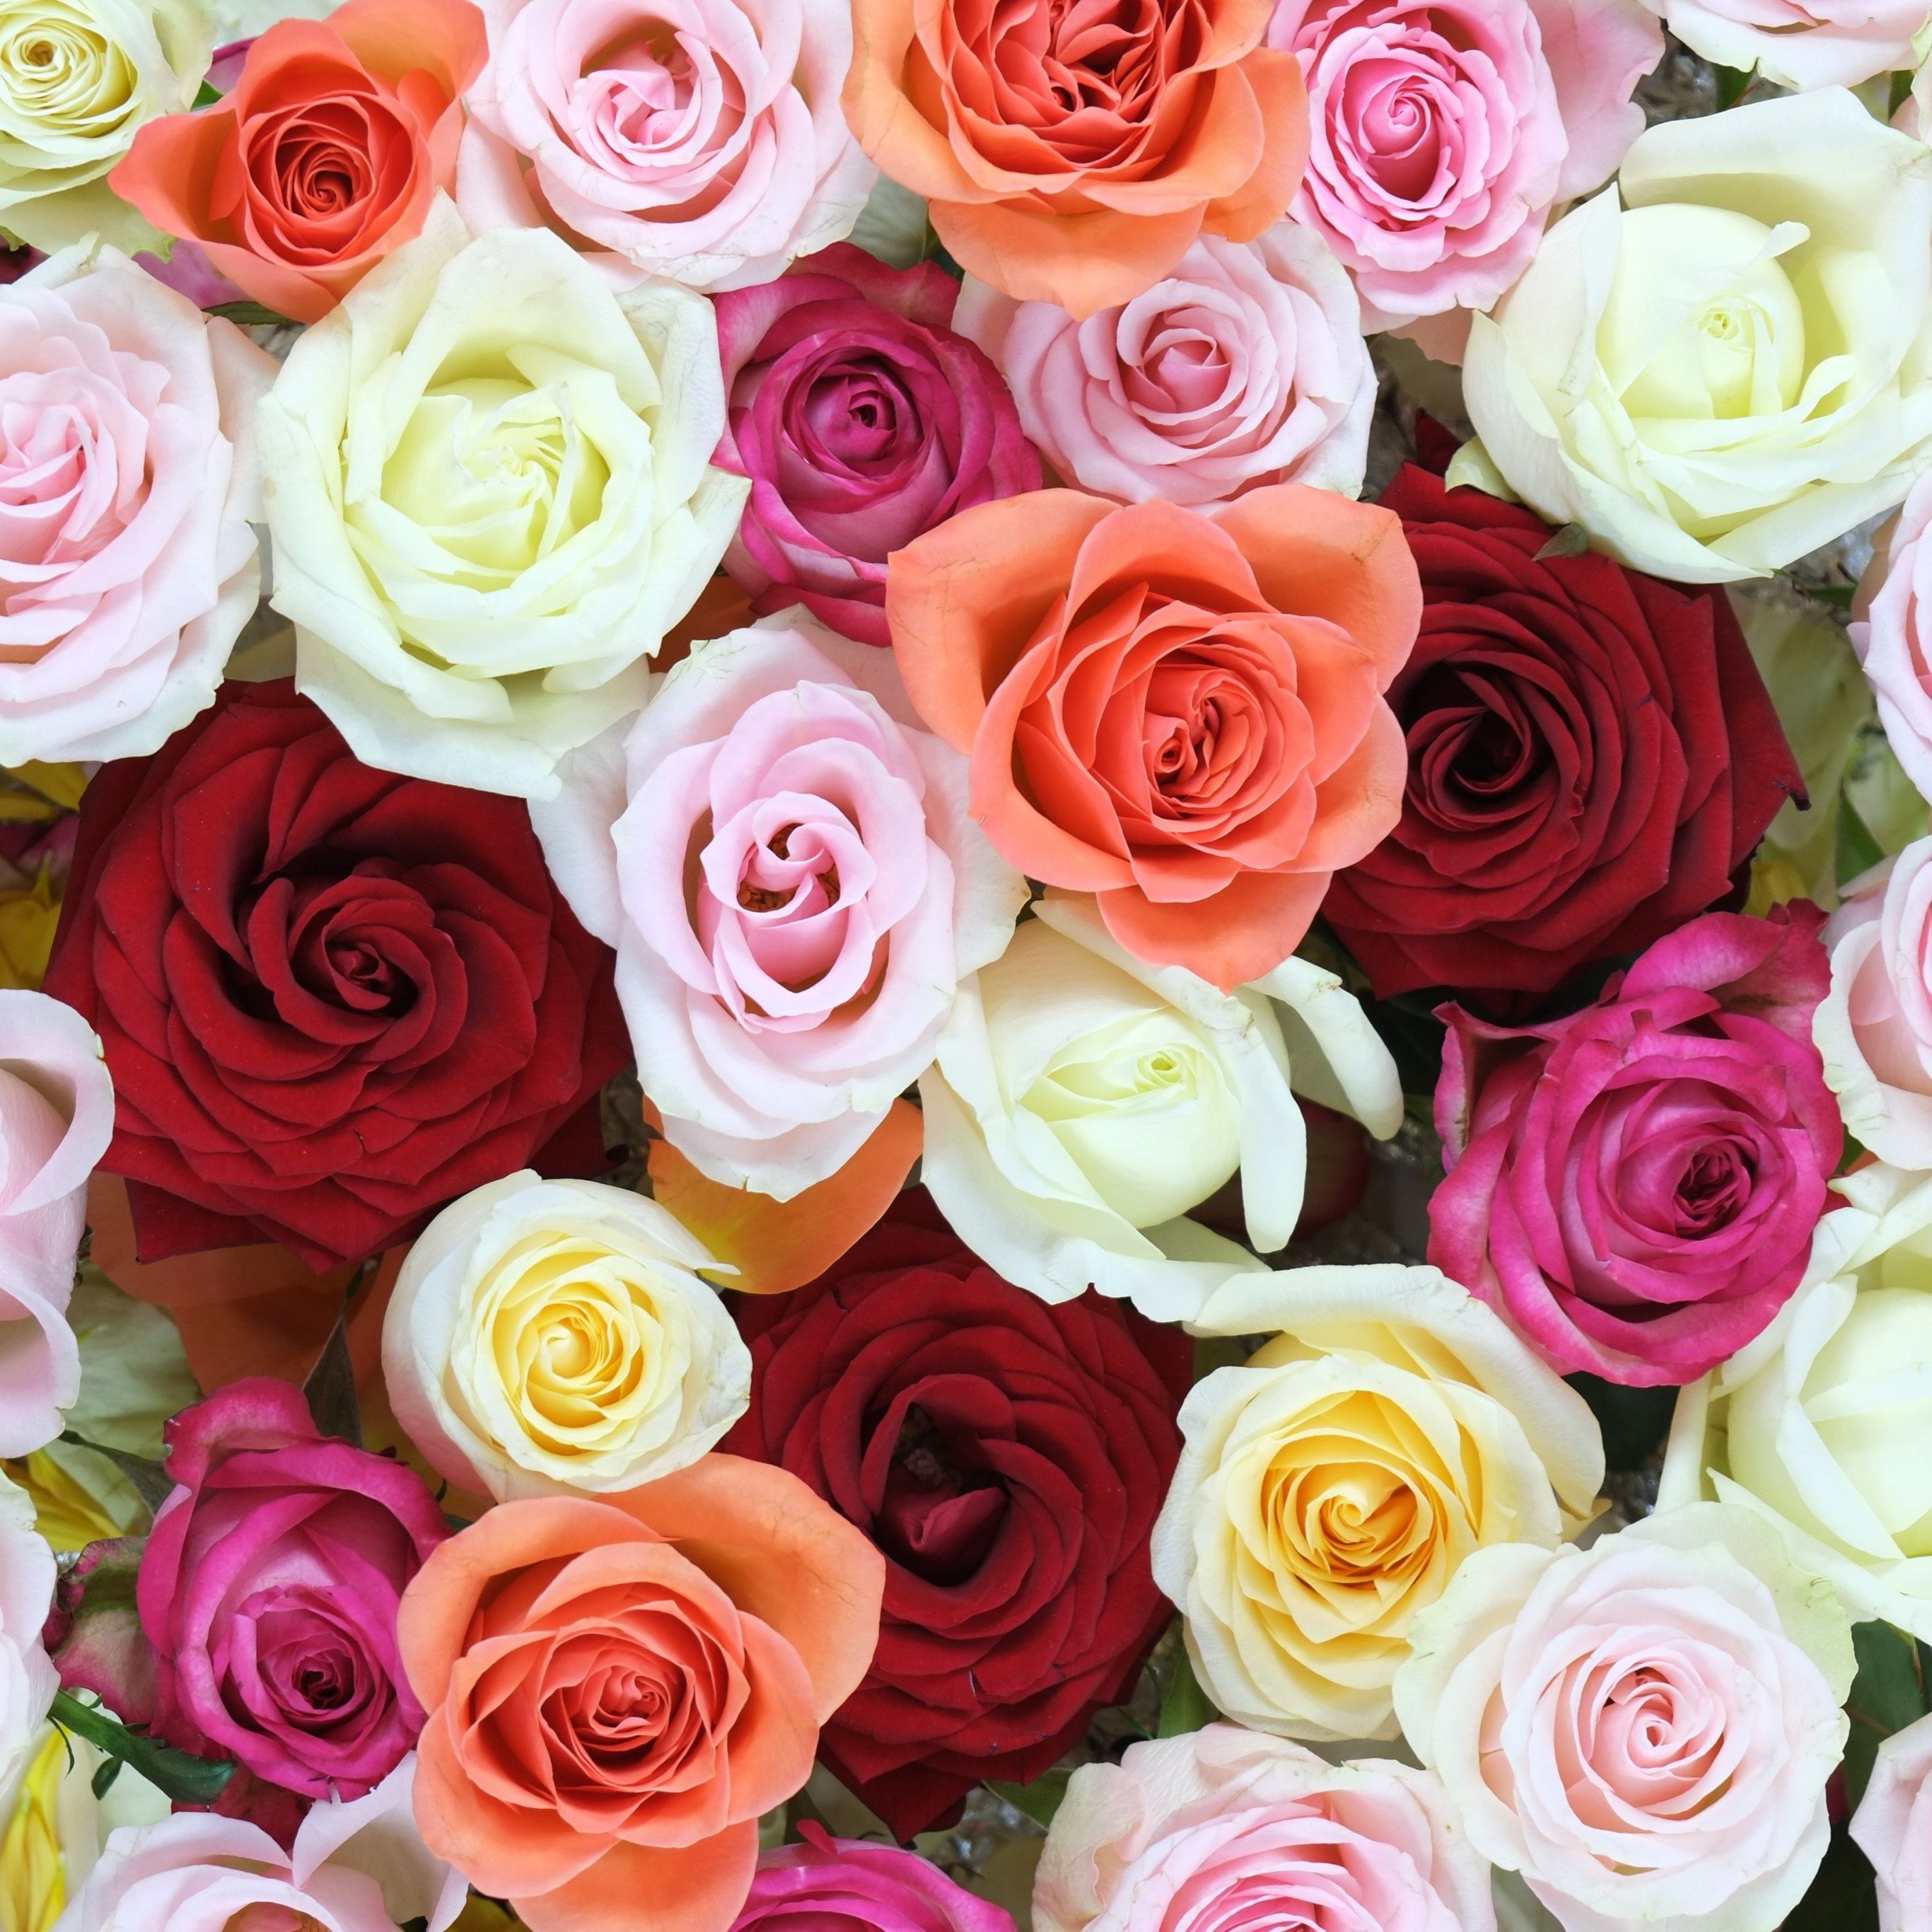 Rose flowers 4K Wallpaper, Multi color, Colorful, Floral Background, Blossom, Beautiful, 5K, Flowers